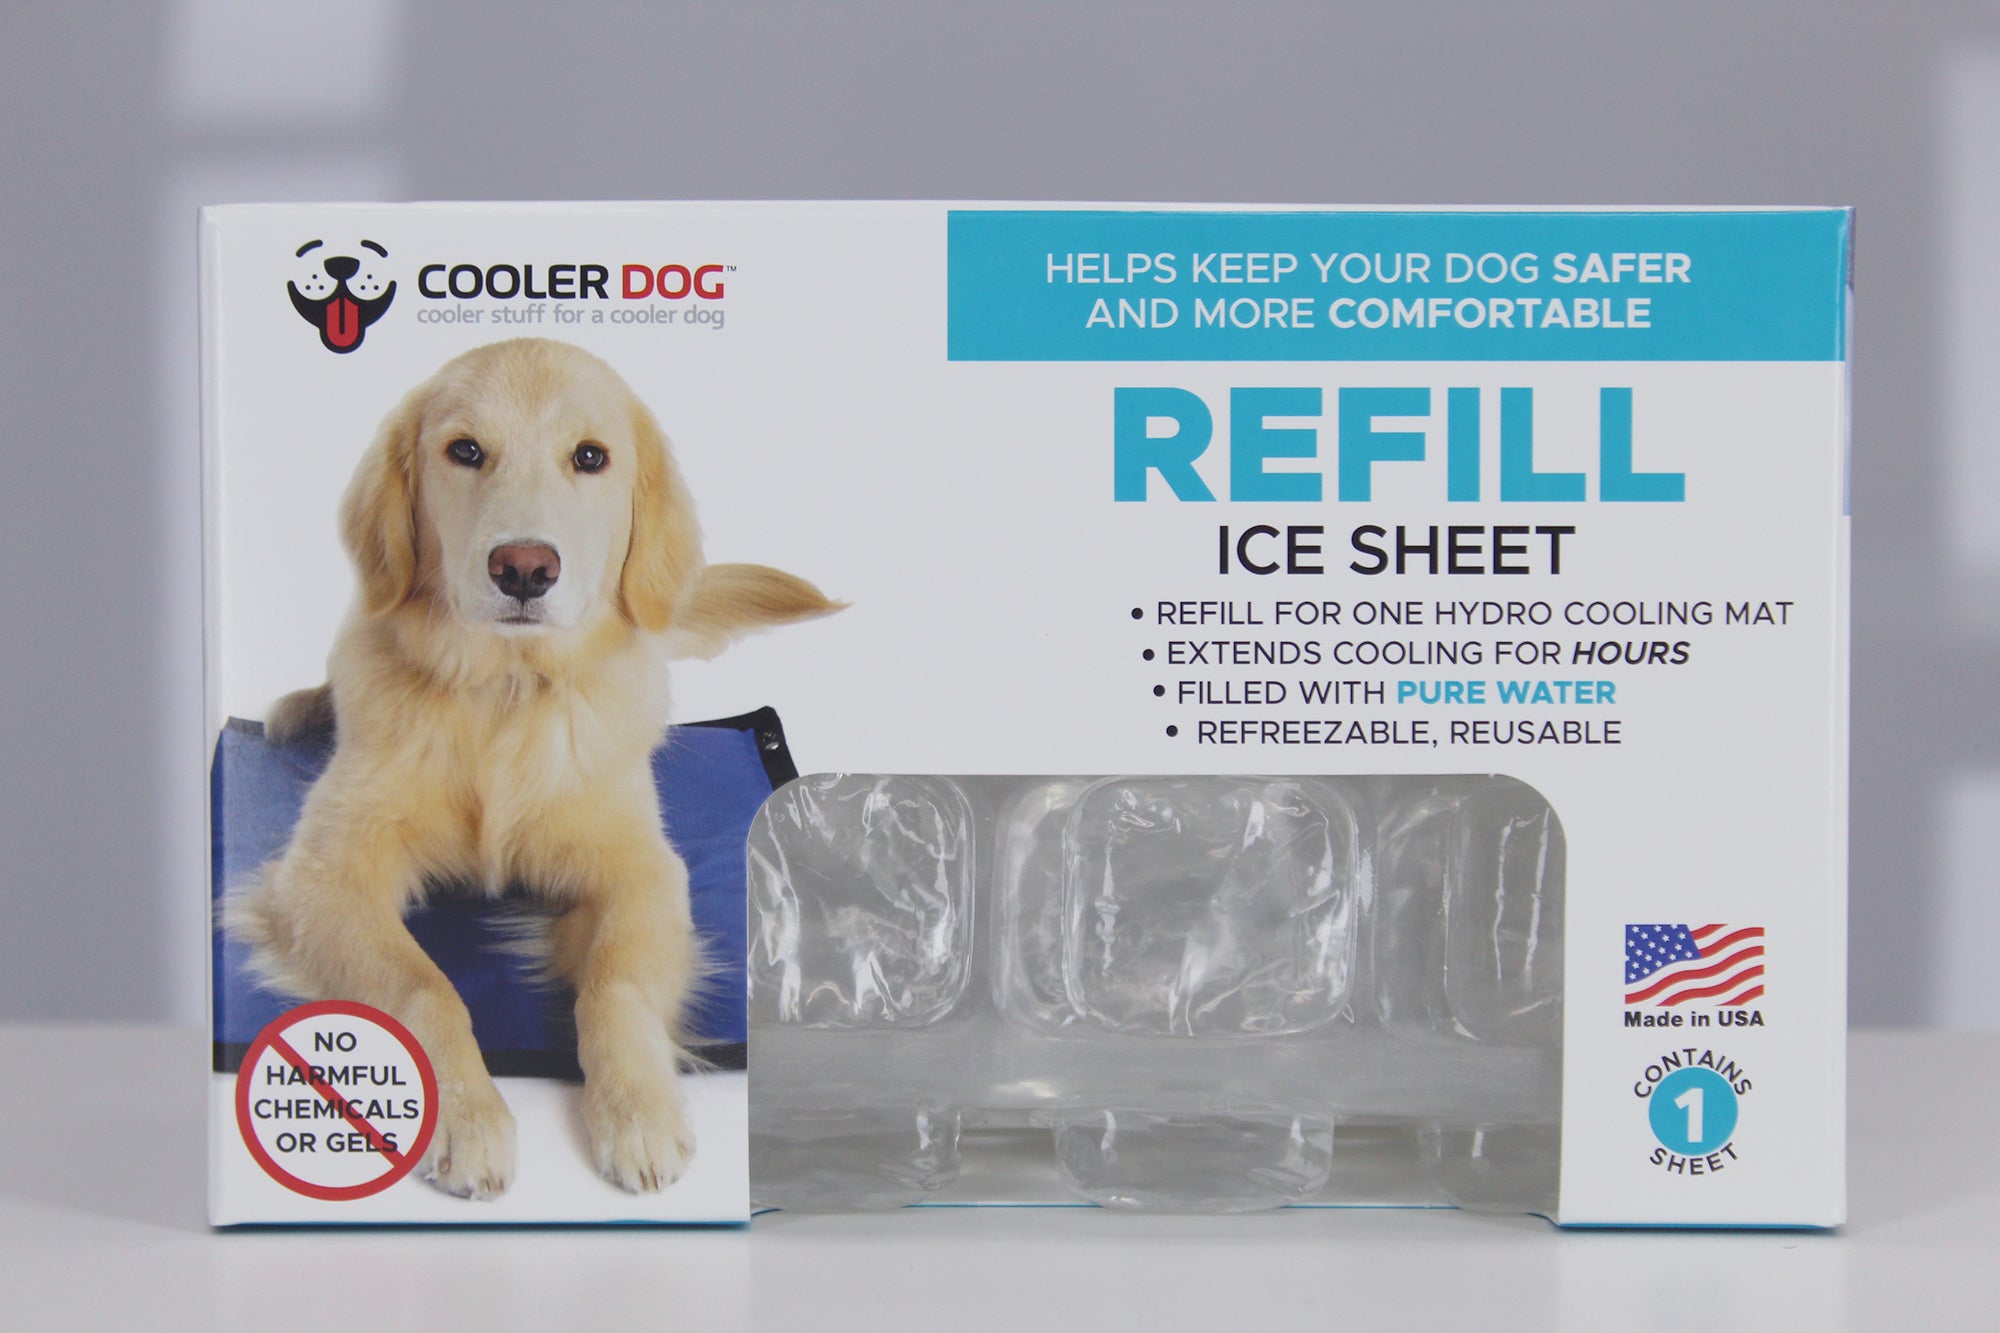 Product Packaging for CoolerDog refill ice sheet, refreezable